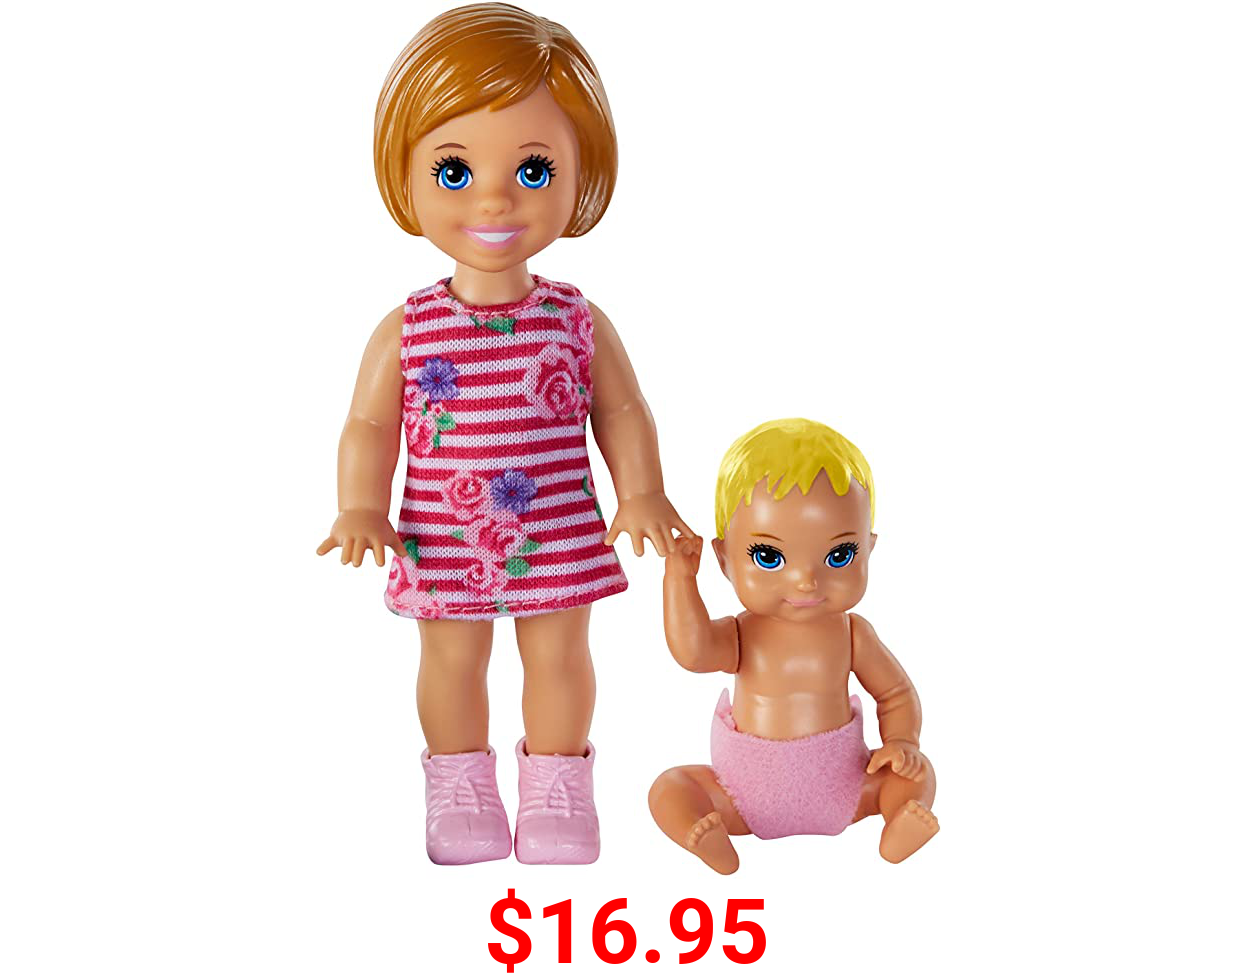 Barbie Skipper Babysitters Inc. Dolls, 2 Pack of Sibling Dolls Includes Small Auburn-Haired Toddler Doll & Blonde Baby Doll Figure in Diaper, for 3 to 7 Year Olds​​